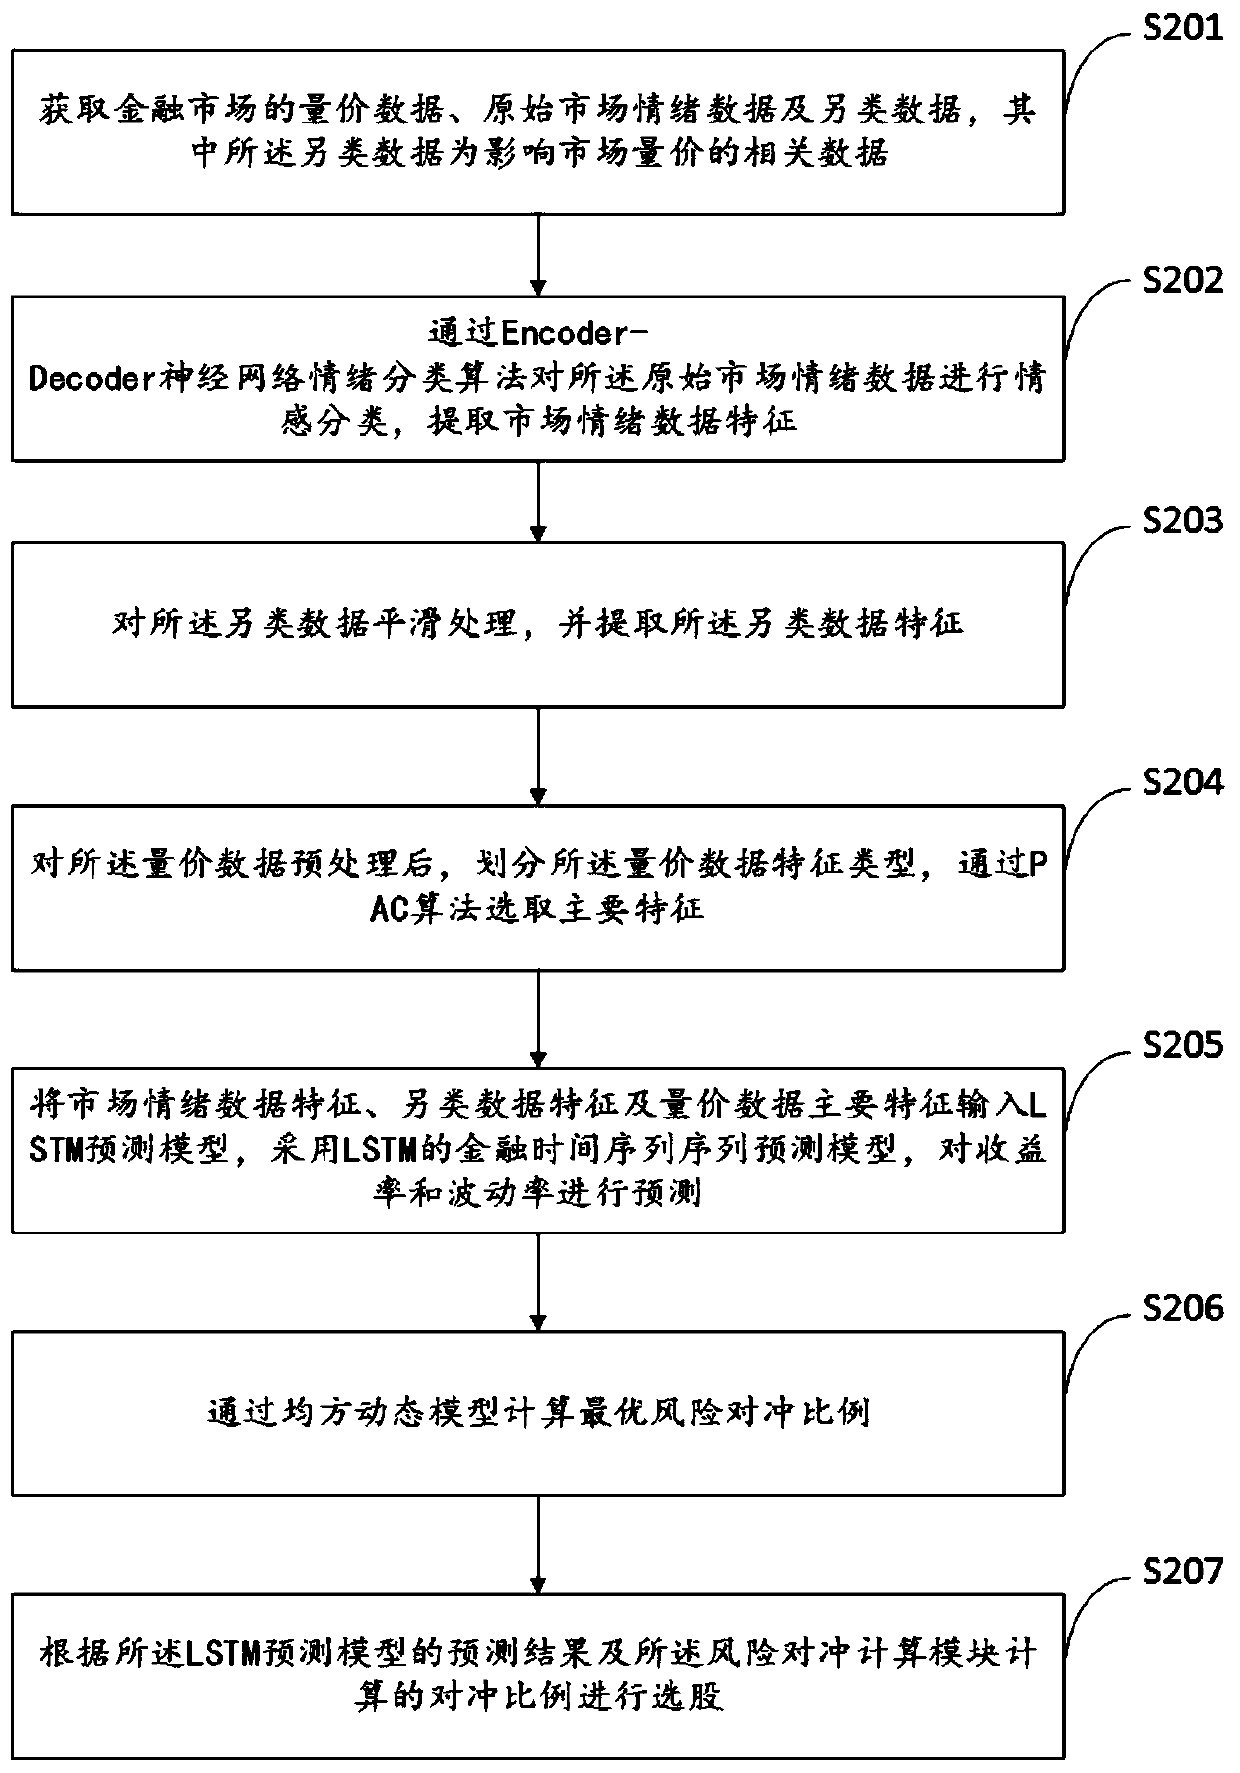 Financial market prediction and decision-making system and method based on artificial intelligence